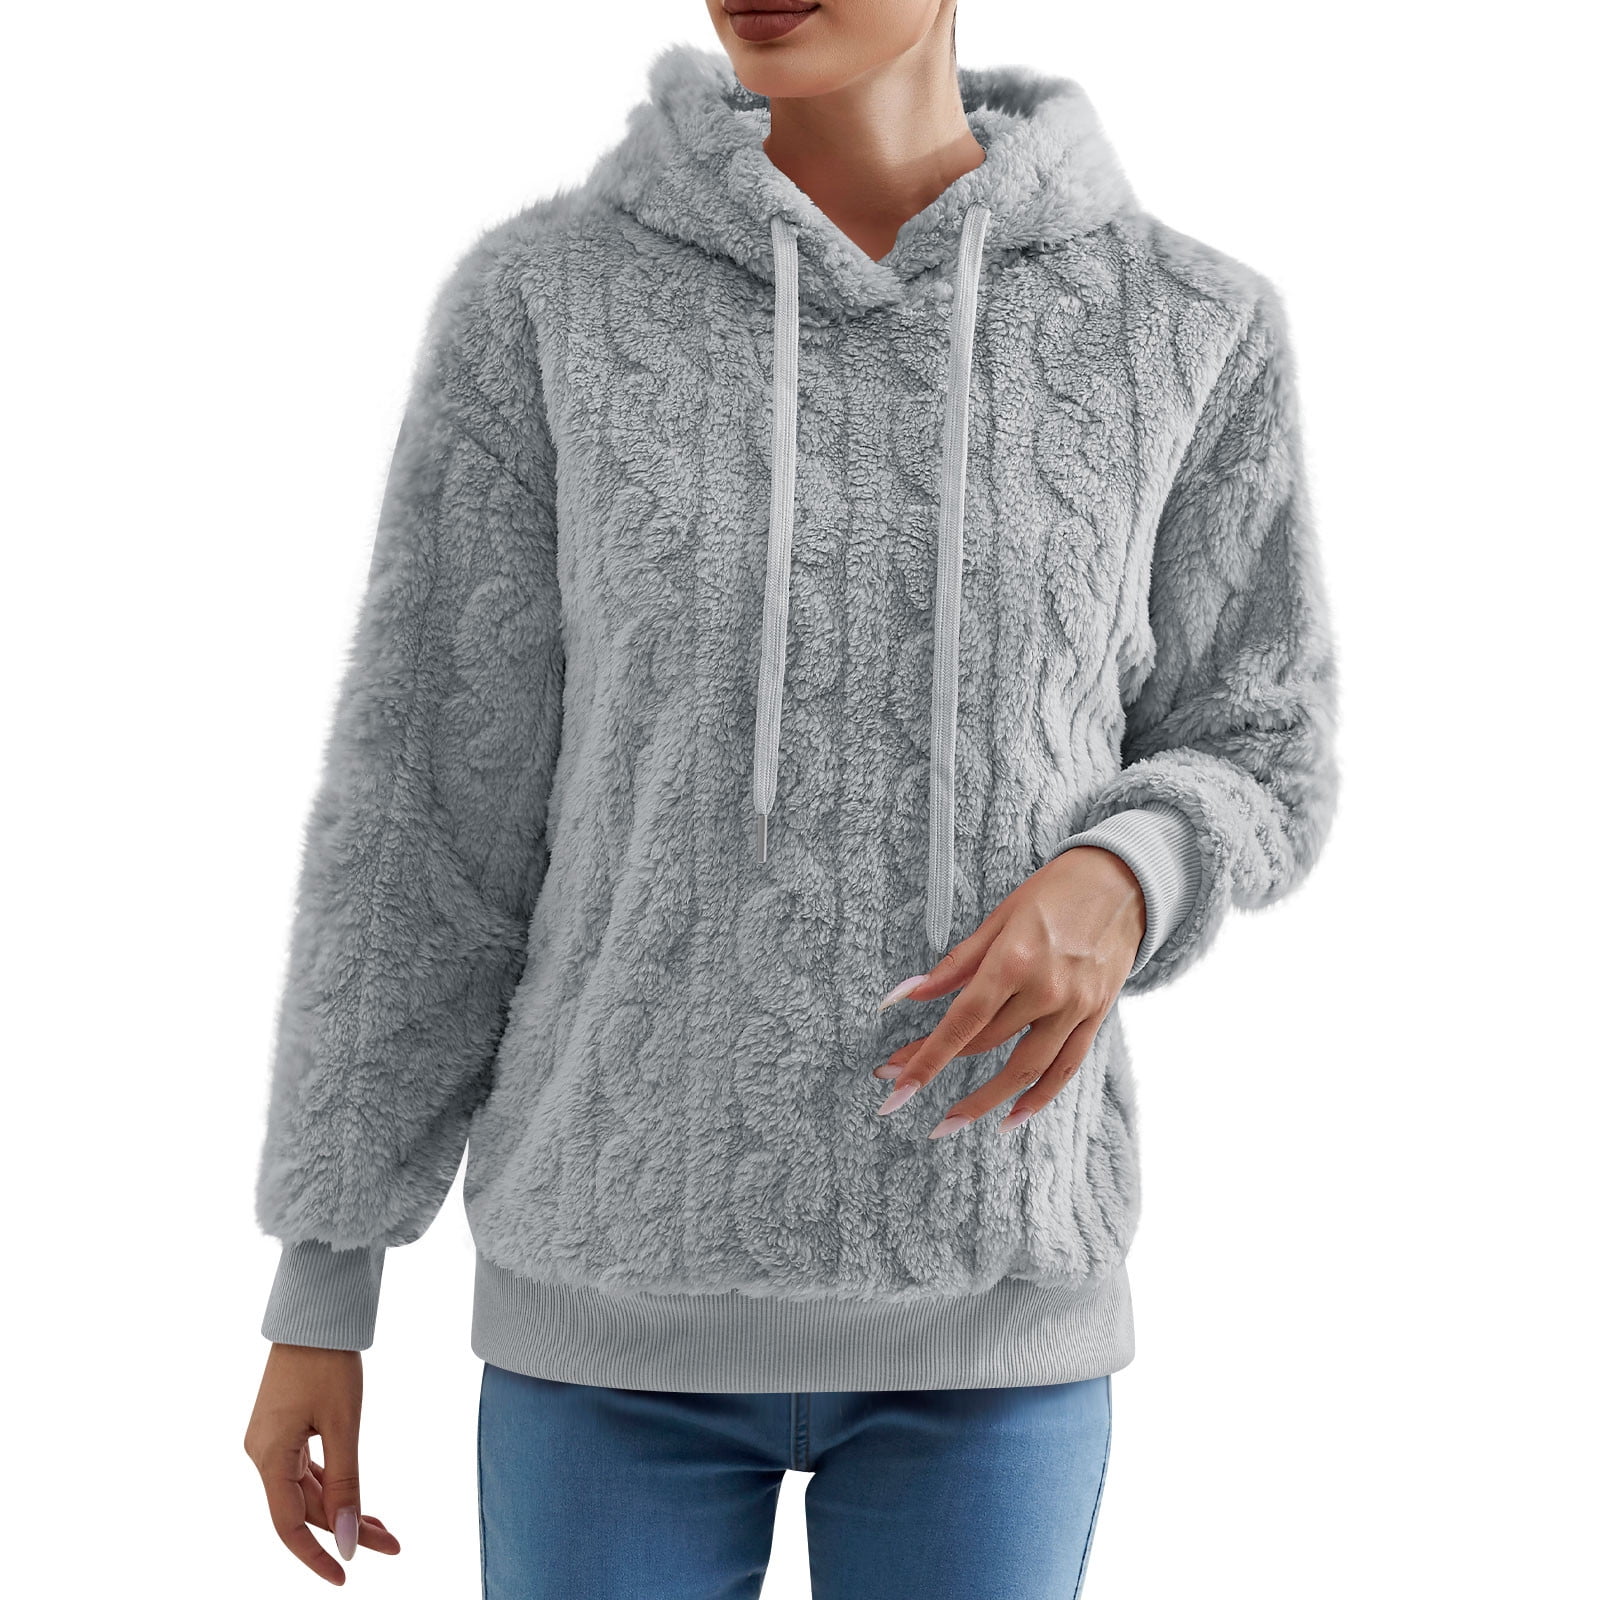 Cable Knit Fuzzy Hood Sweater Quarter Zip Pullover Sweatshirt